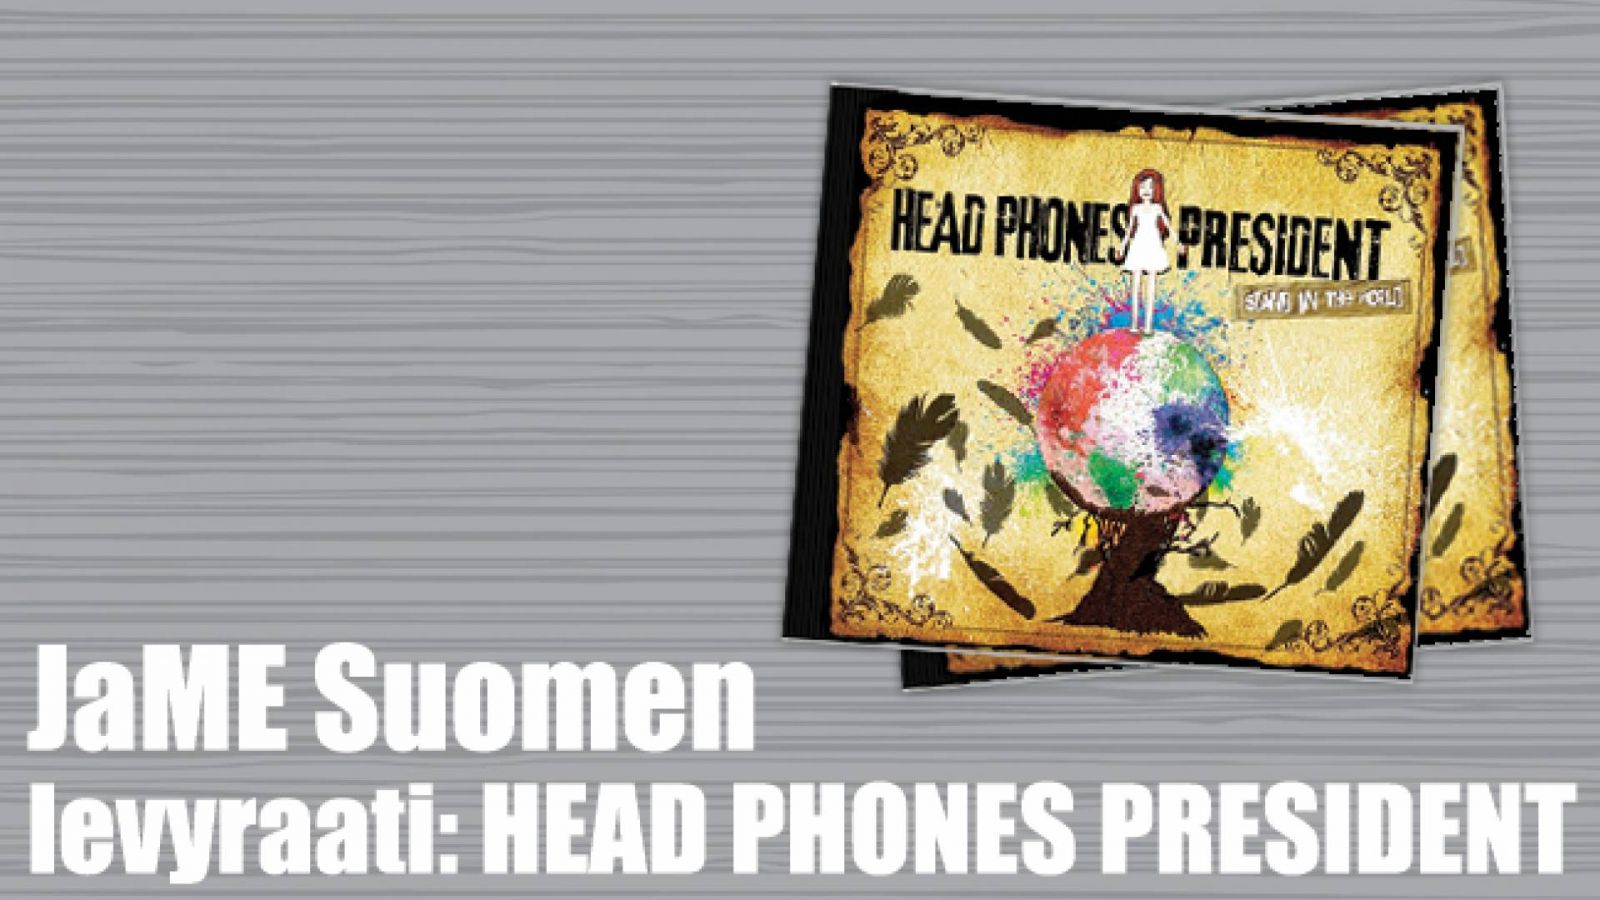 JaME Suomen levyraati: HEAD PHONES PRESIDENT © All Rights Reserved